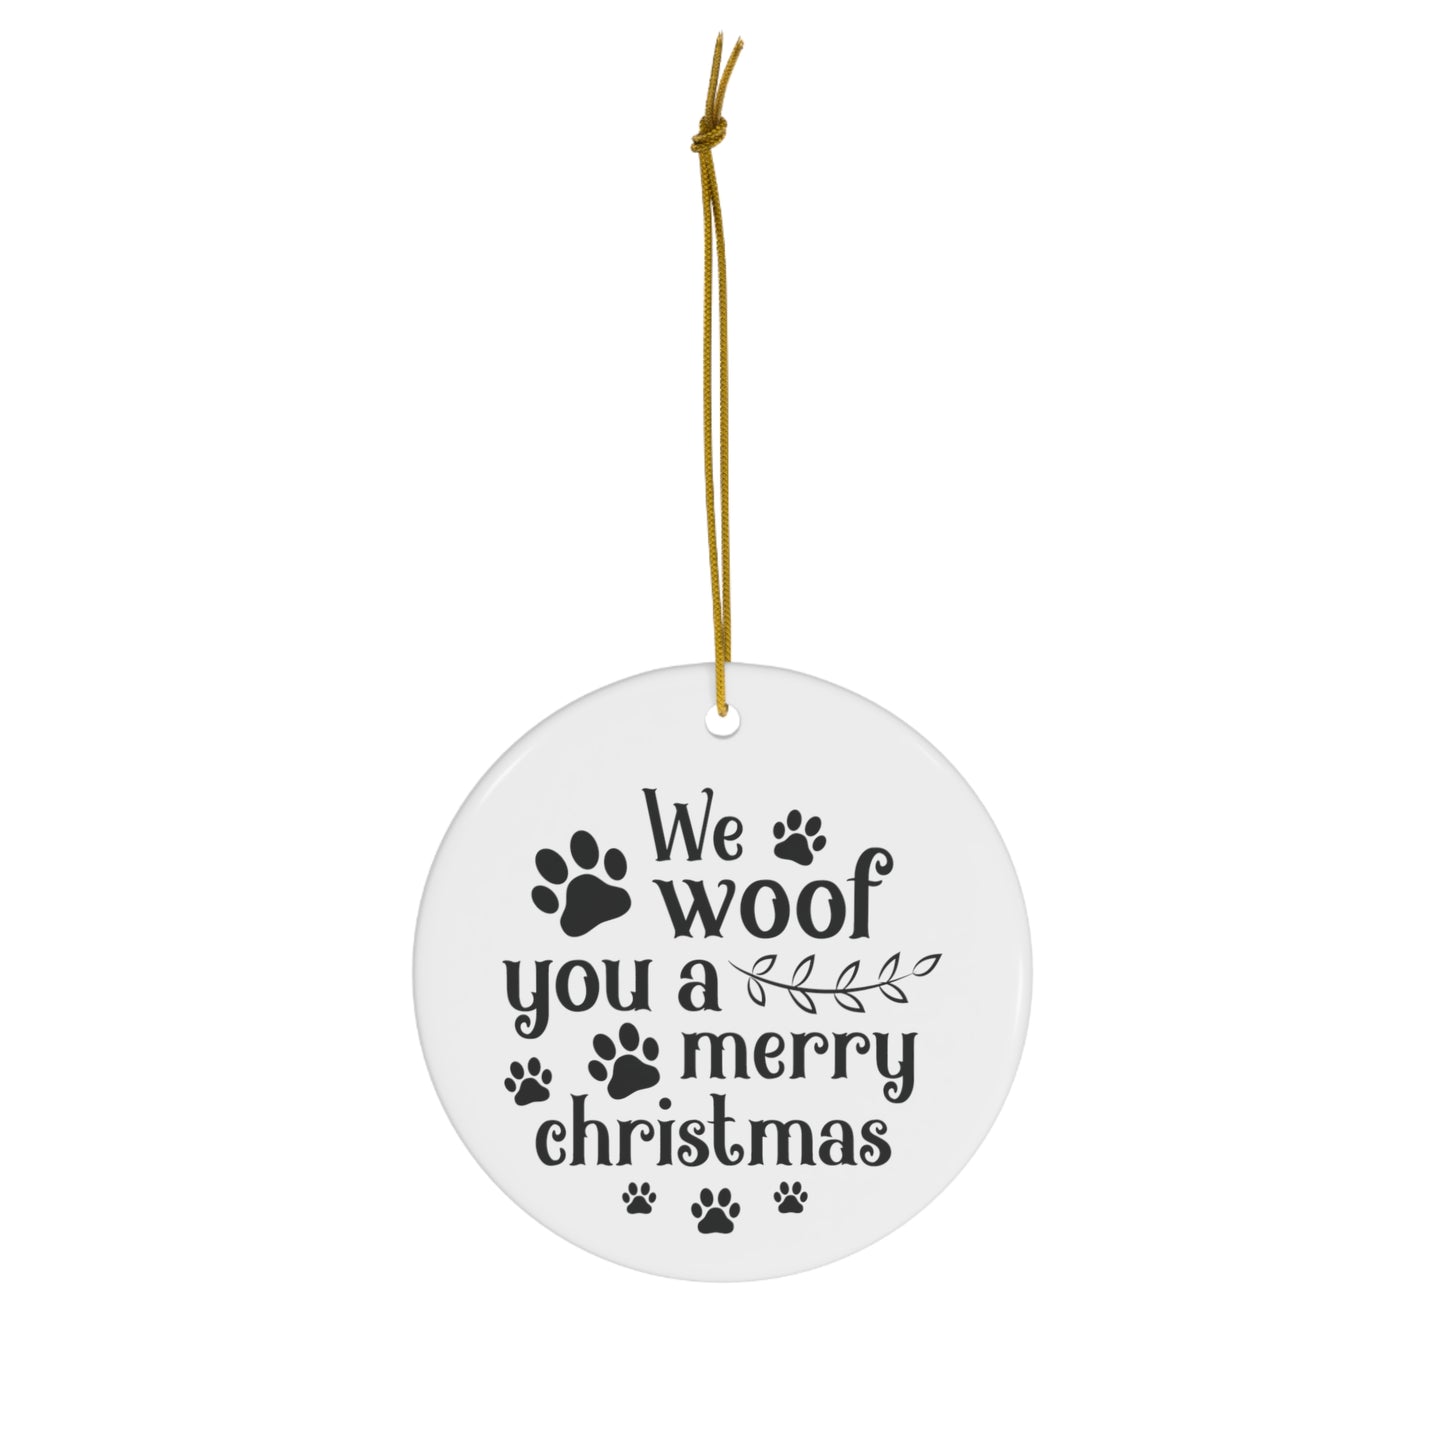 We Woof You a Merry Christmas Ornament